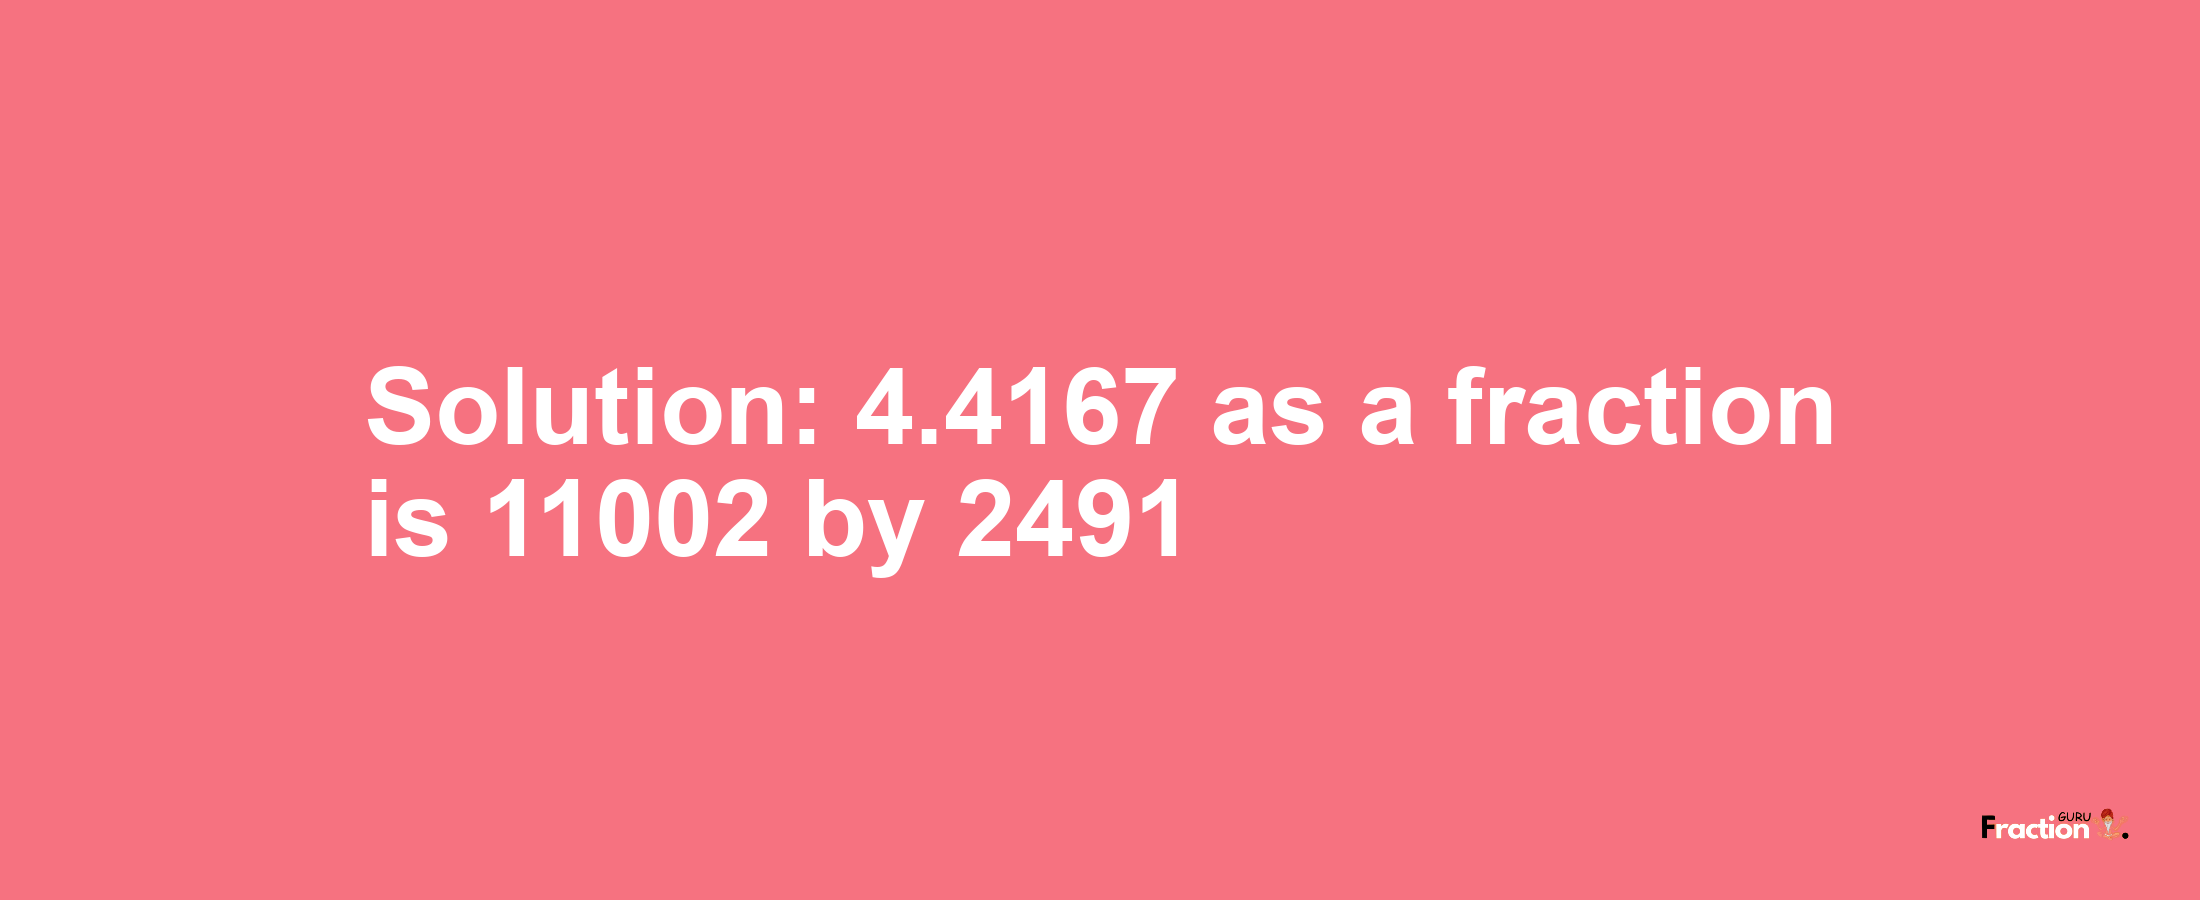 Solution:4.4167 as a fraction is 11002/2491